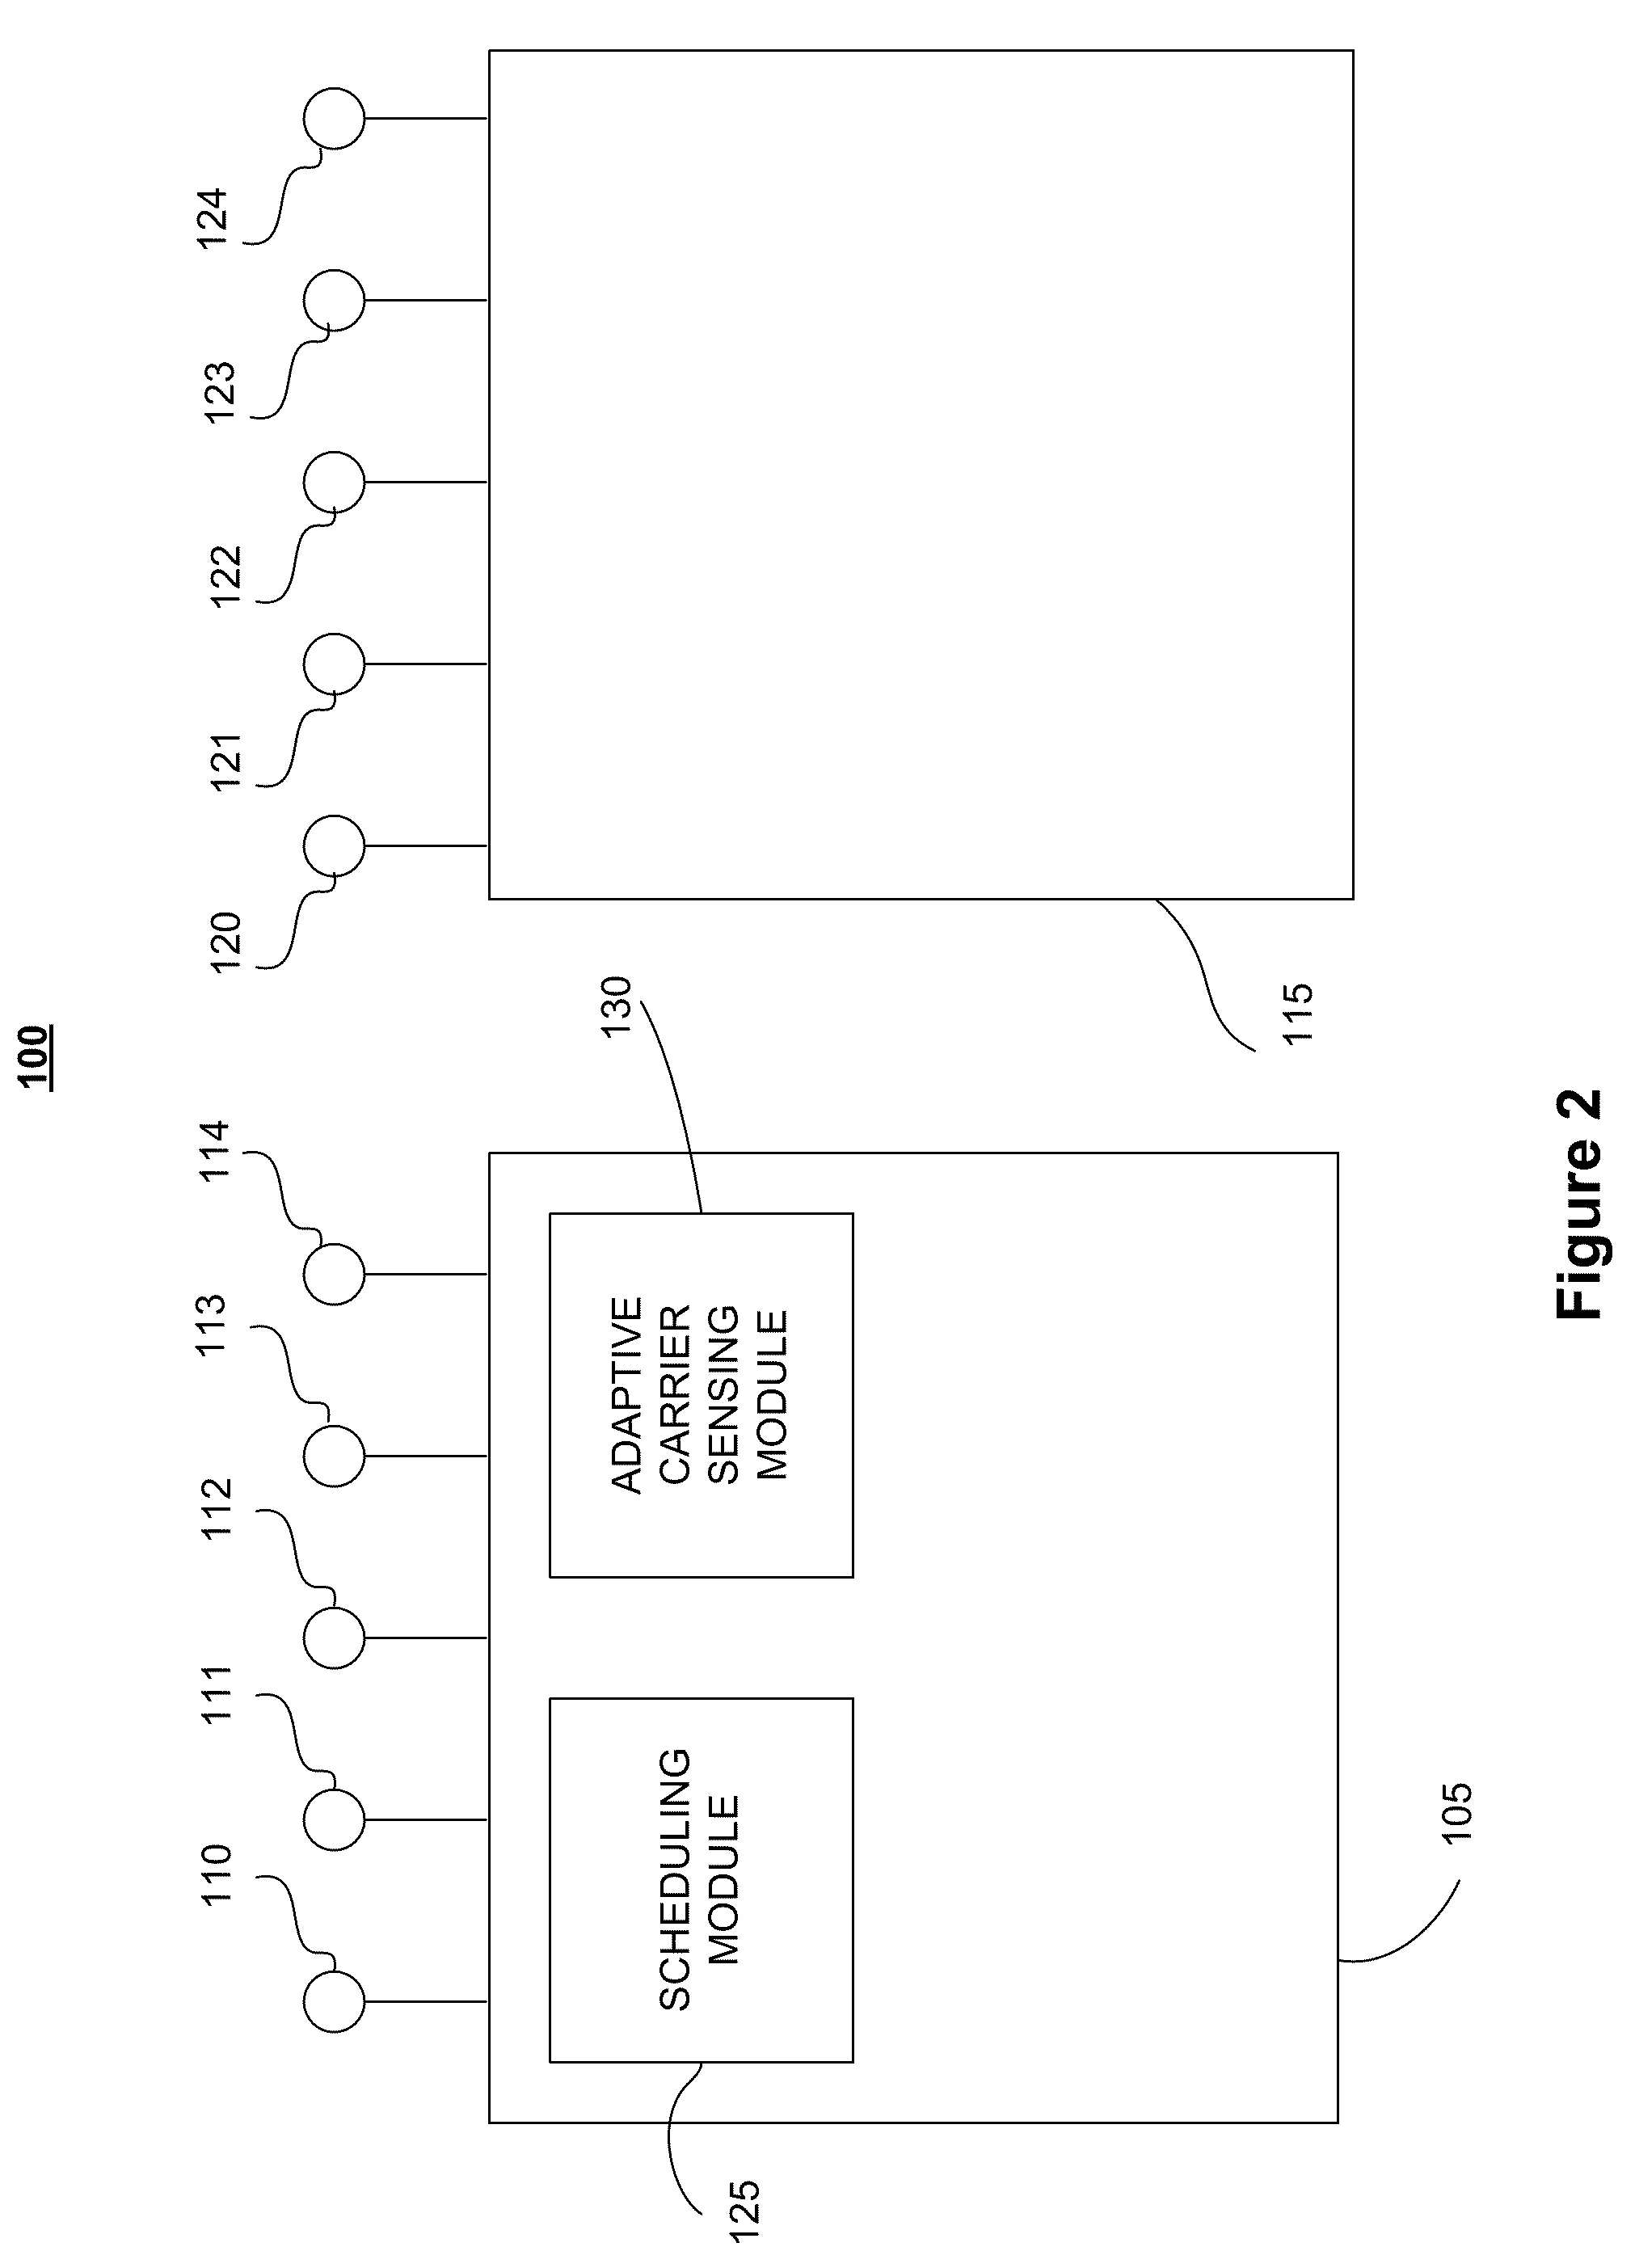 Systems and methods for achieving high data-rate wireless communication